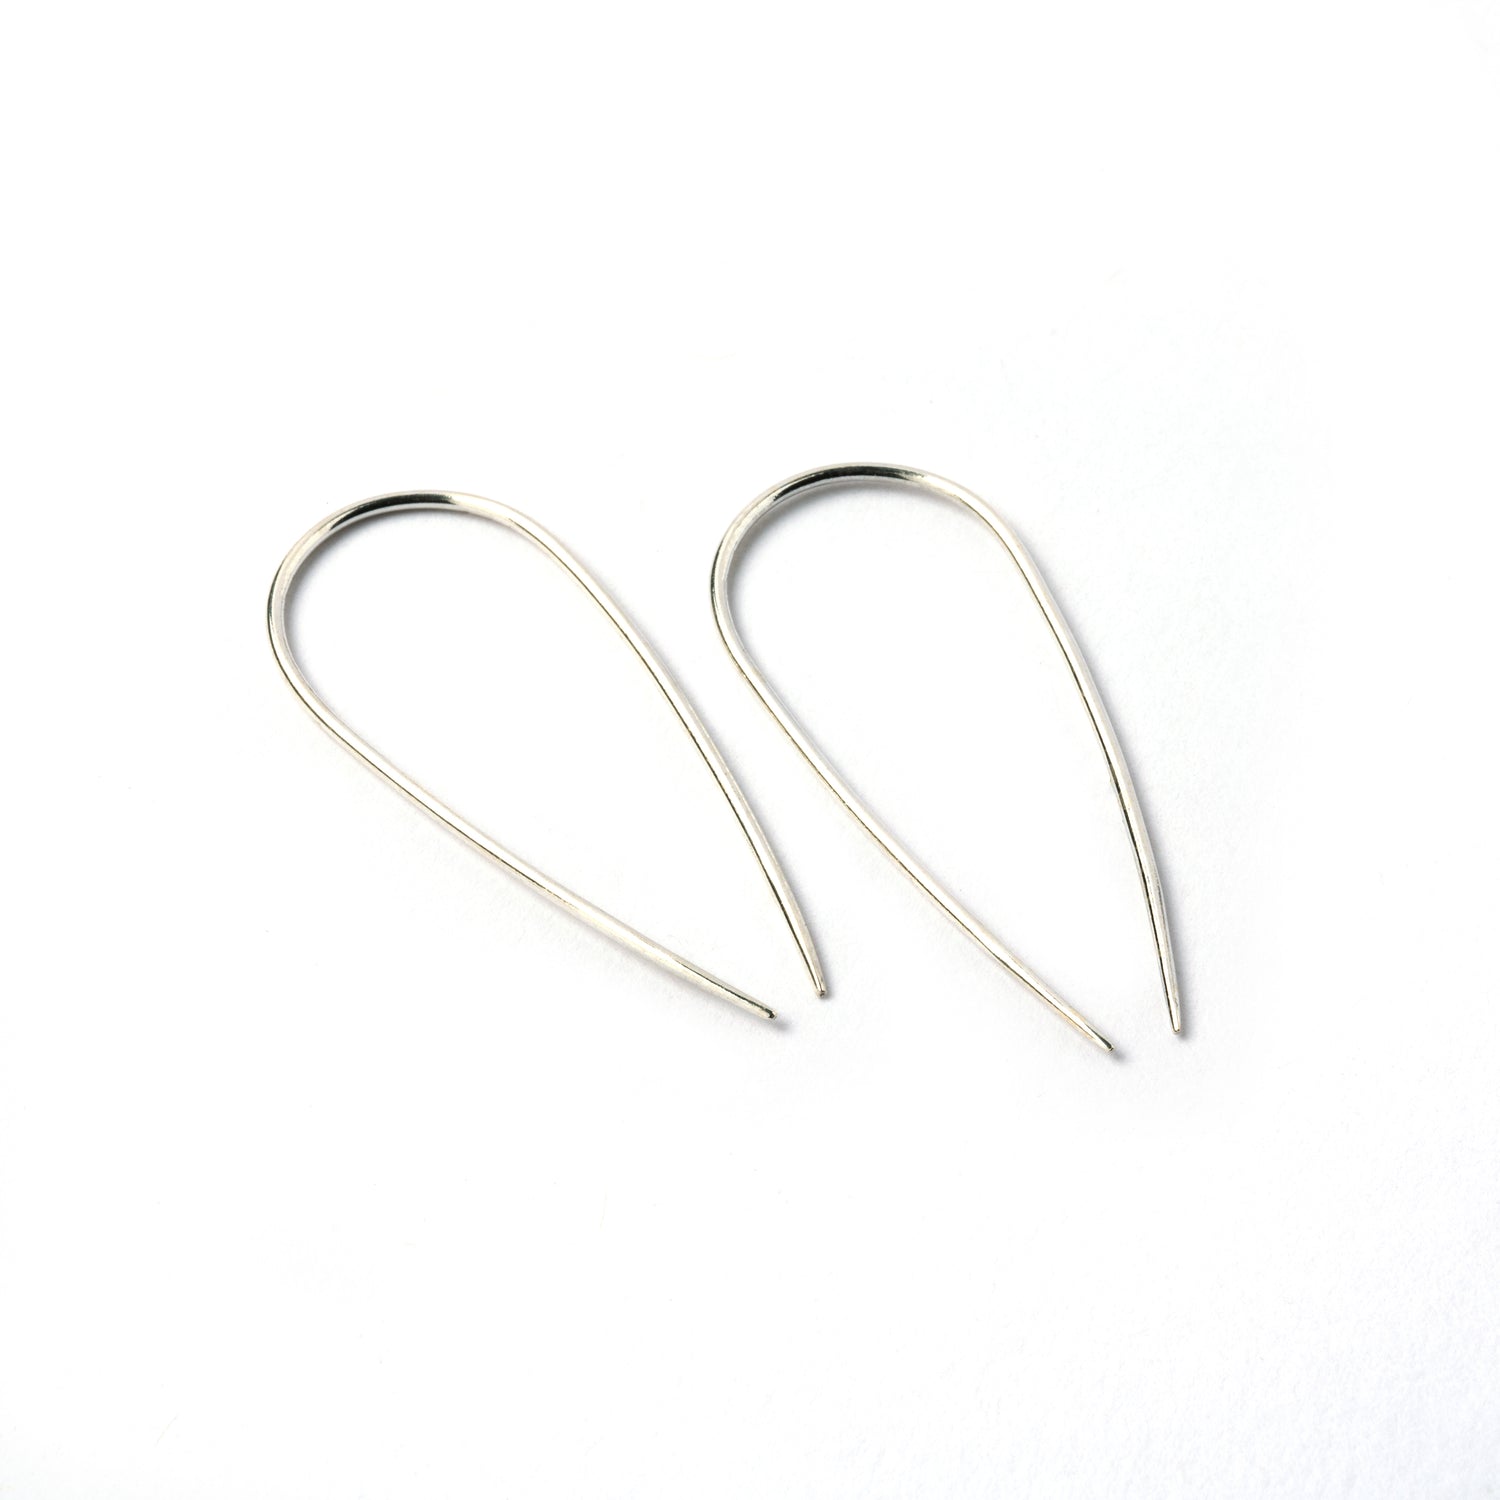 pair of silver wire long horseshoe earrings left side view